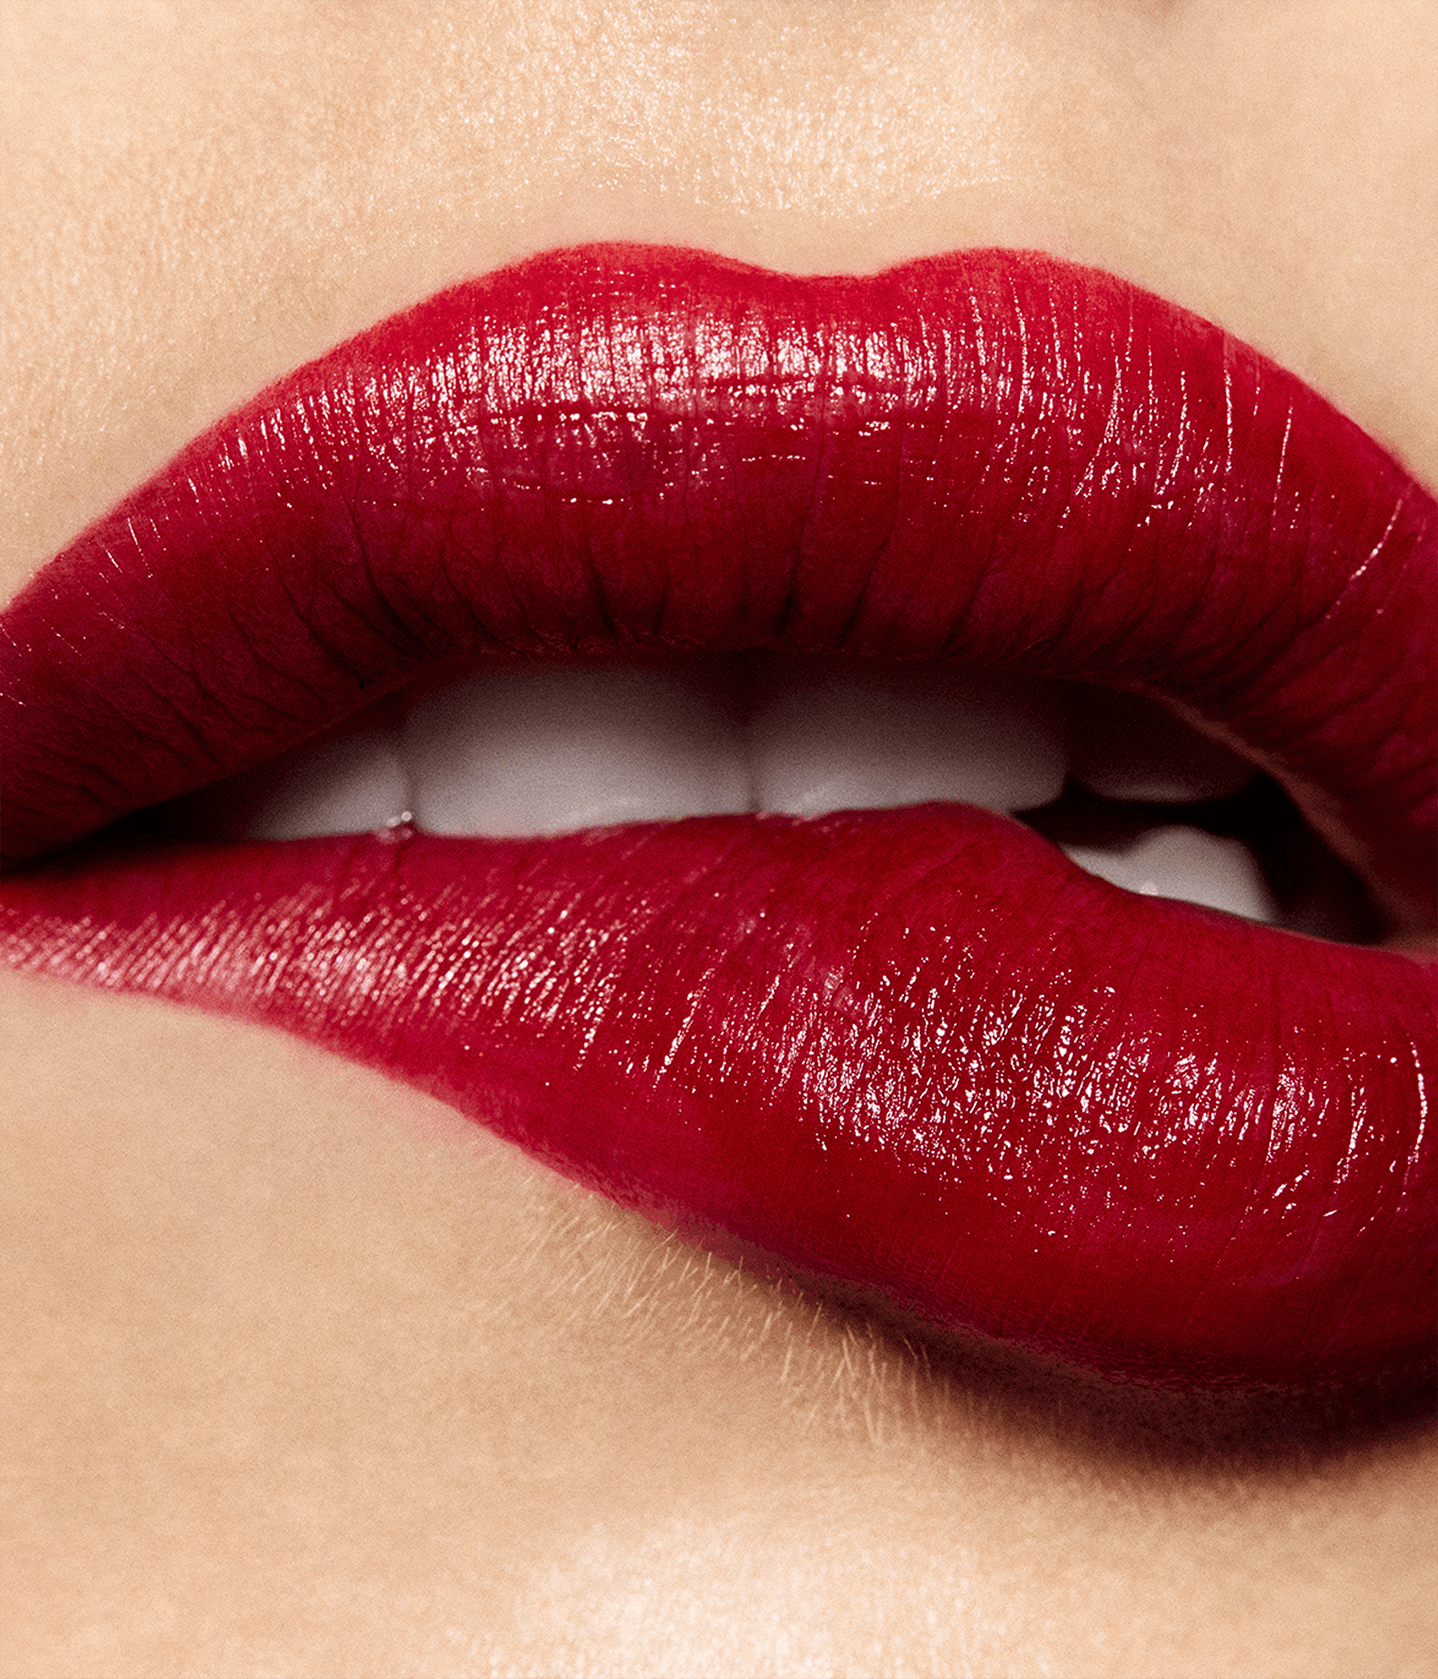 La bouche rouge The Iconic Rouge Montaigne on lips